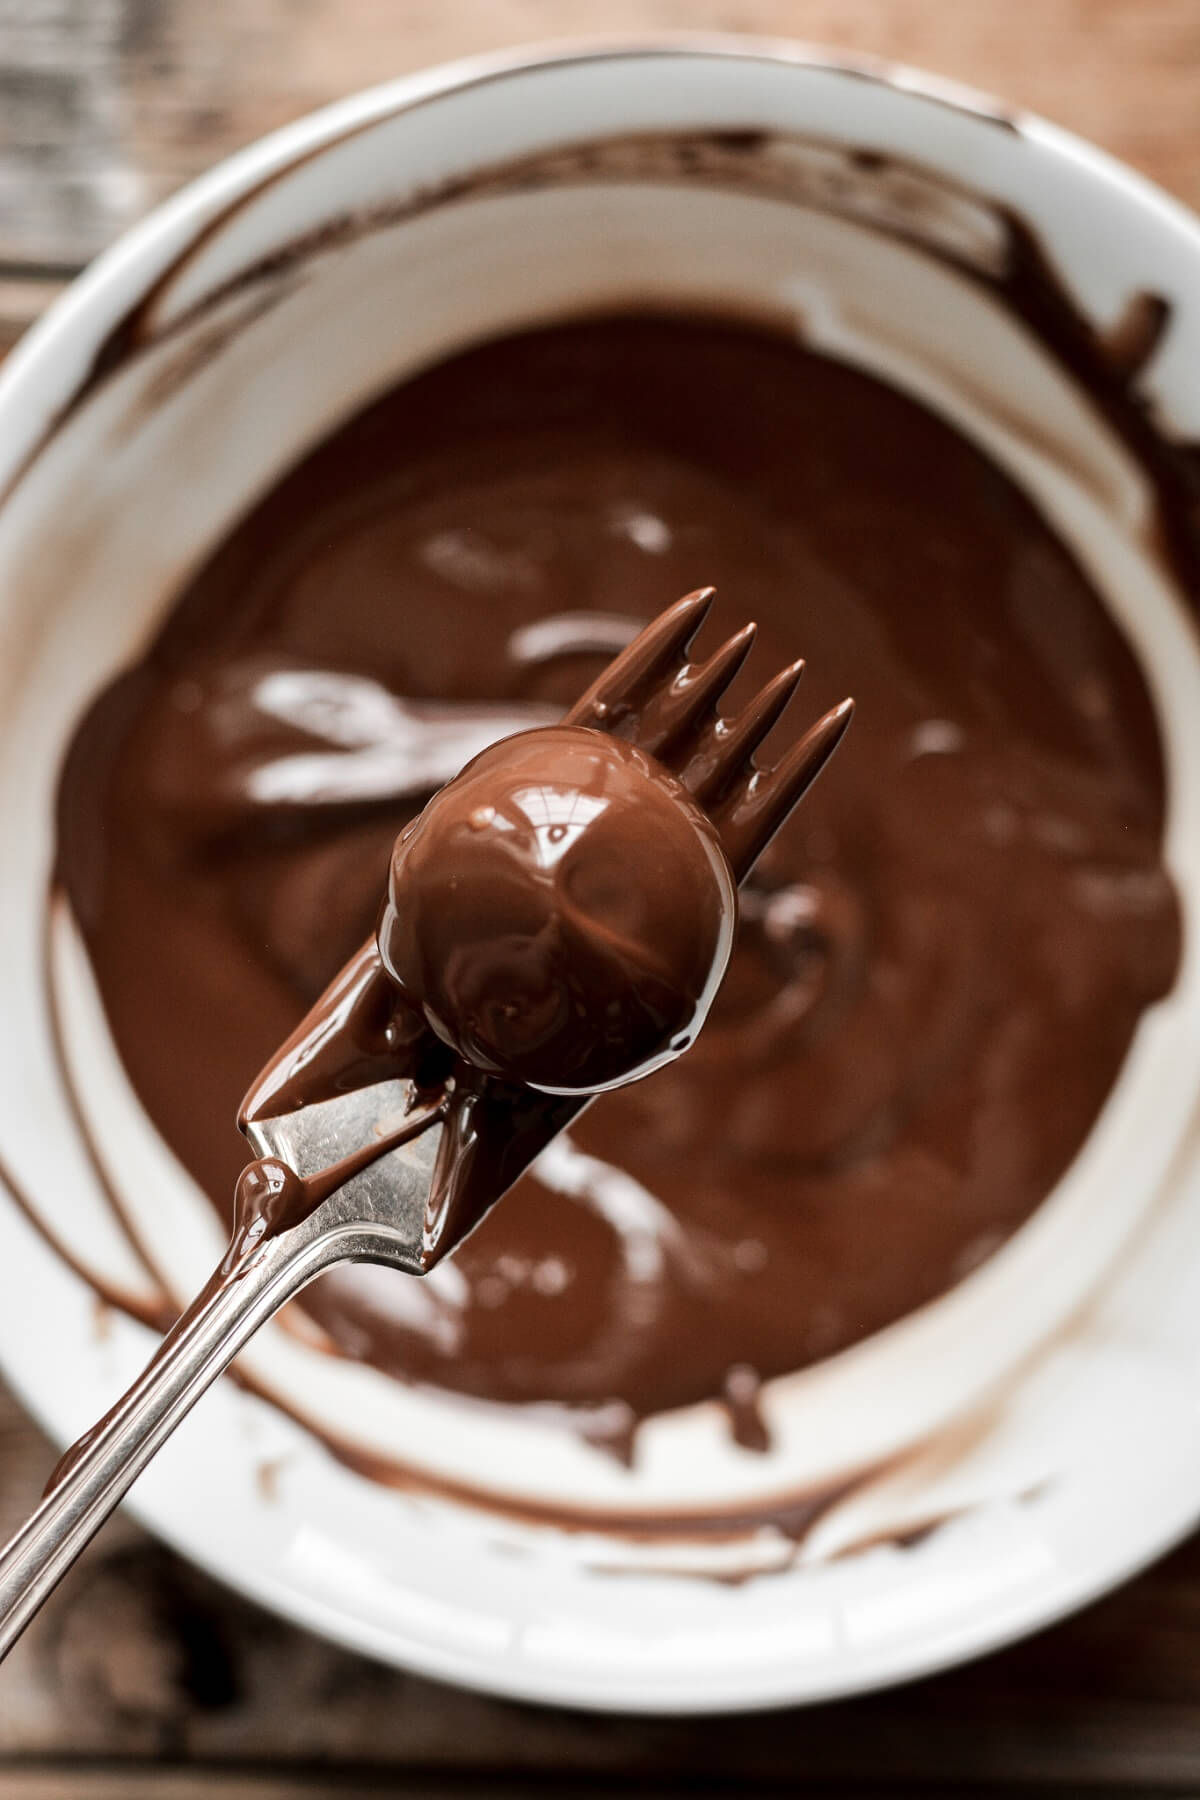 Chocolate truffle being dipped in melted chocolate.